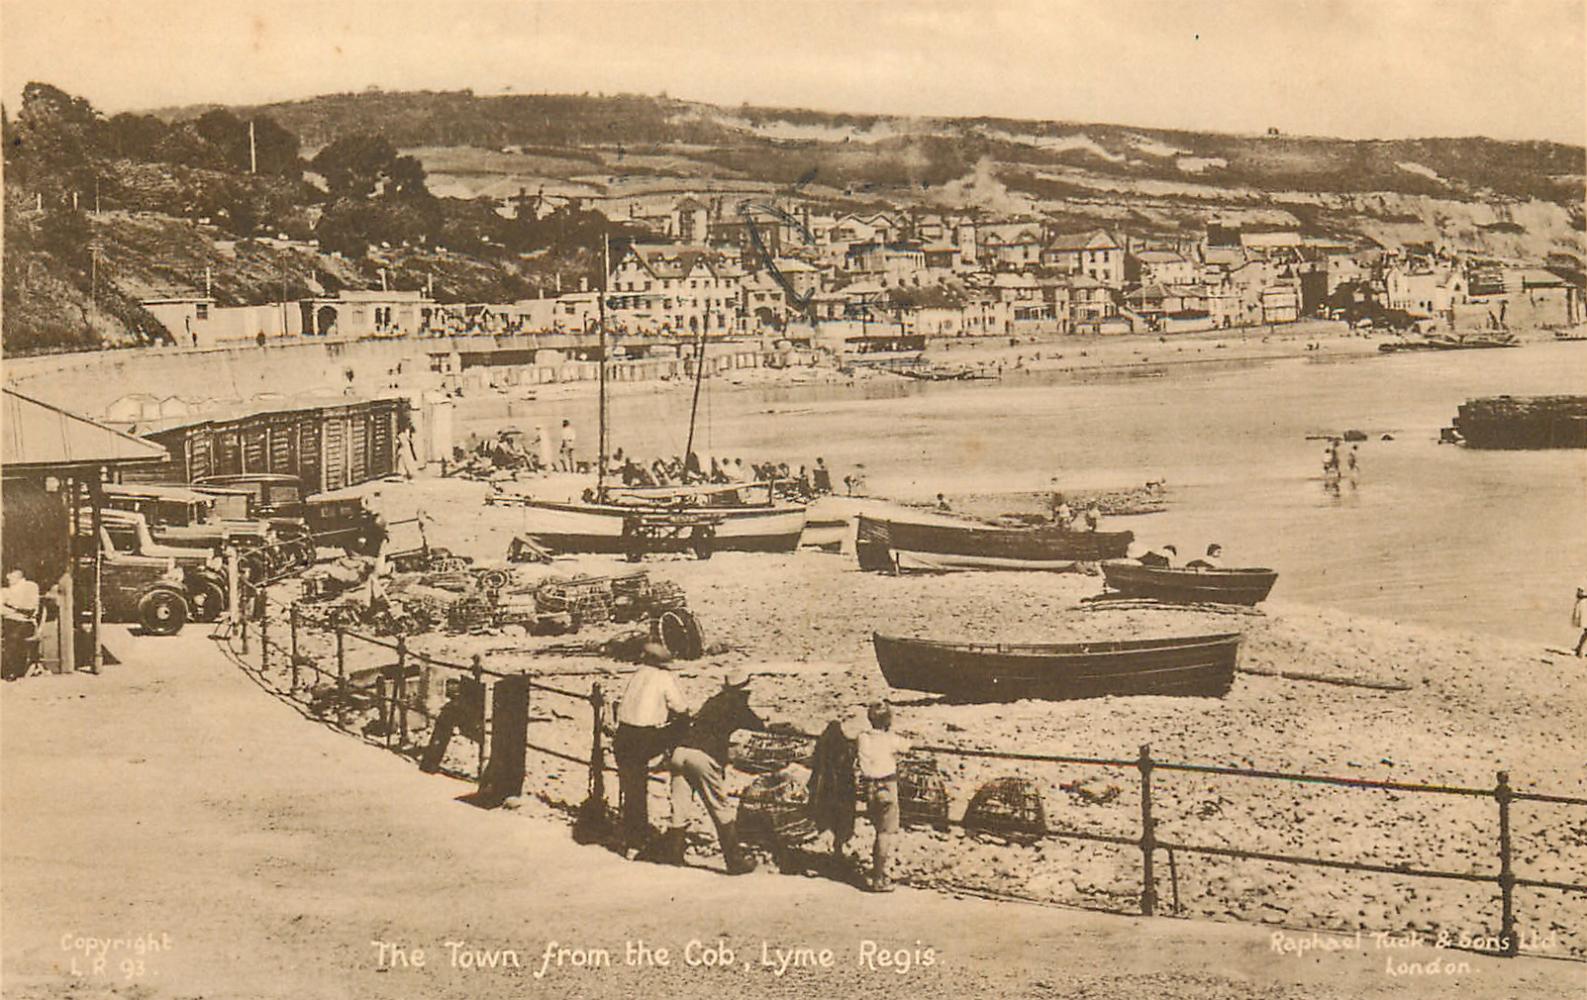 Lyme Regis viewed from The Cobb circa 1937